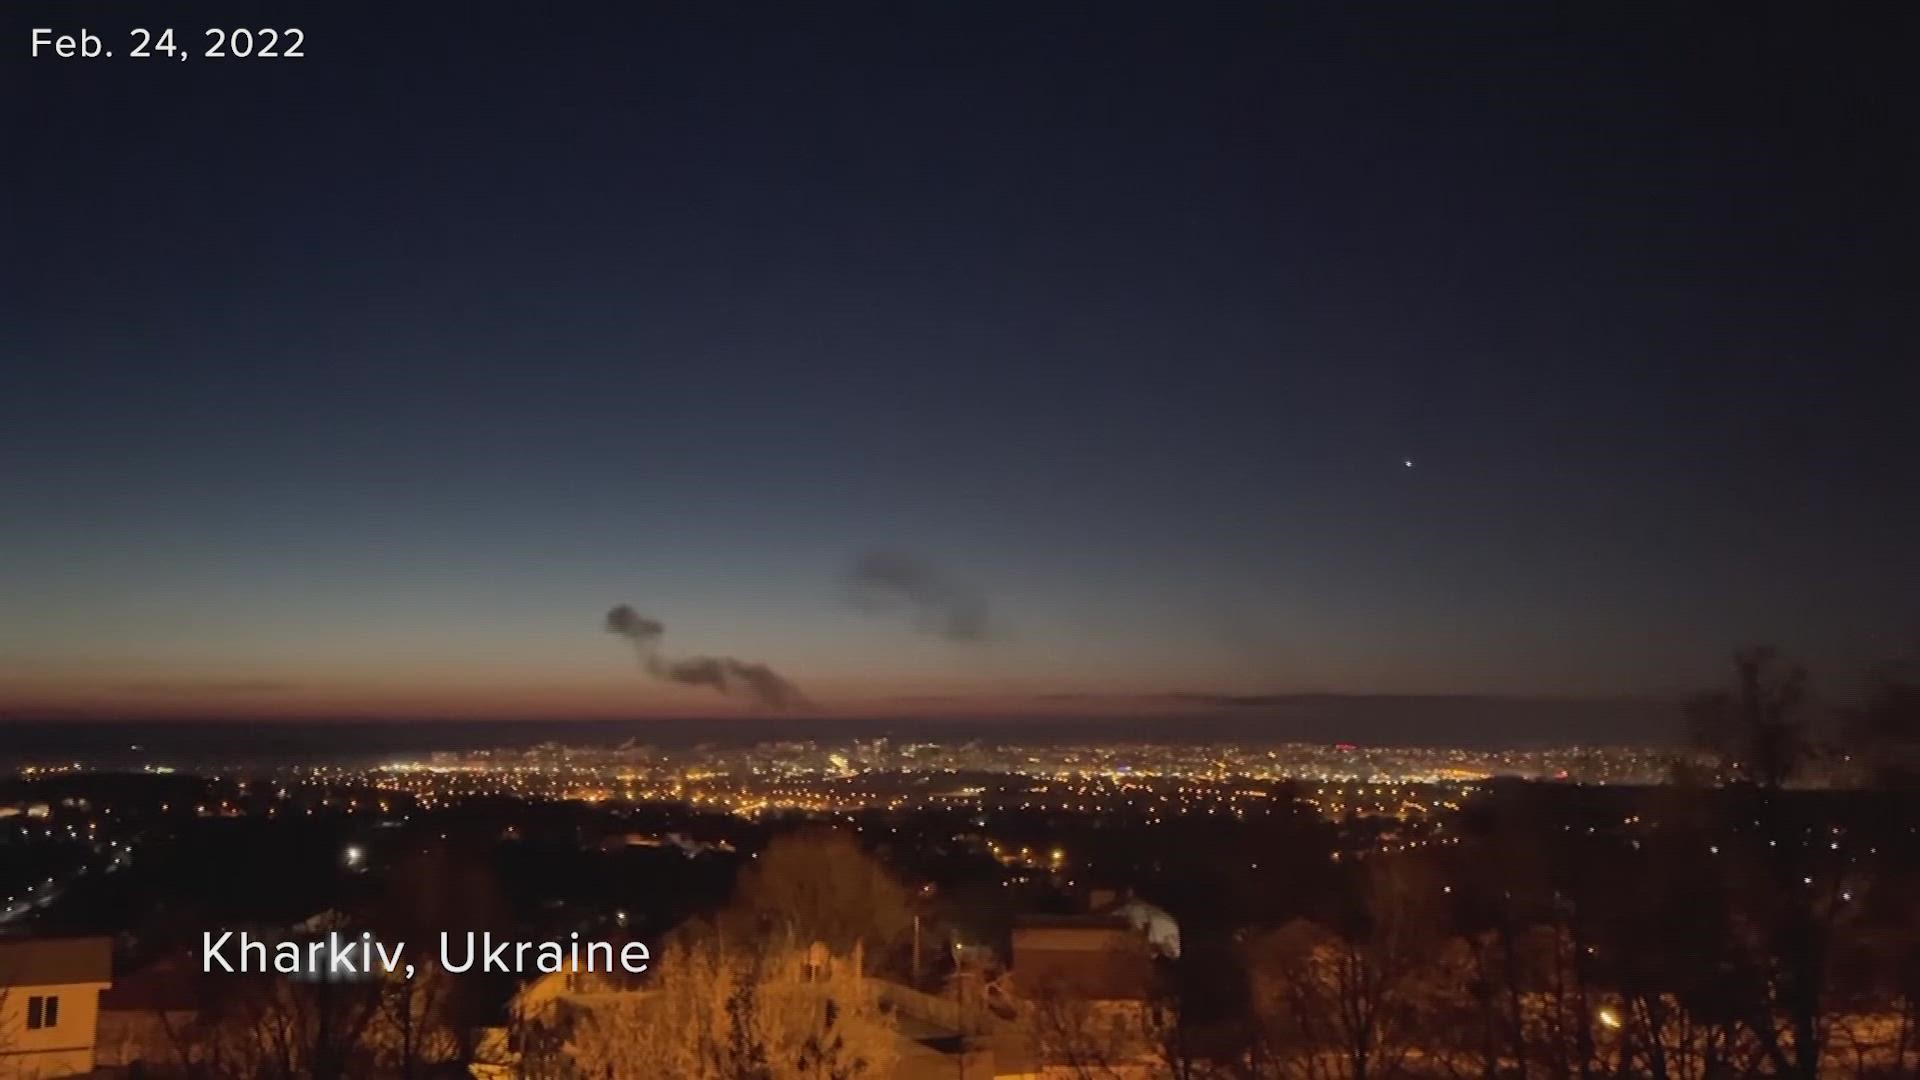 Smoke was seen over Kharkiv, Ukraine, and sounds of explosions were reported after Russia's Vladimir Putin announced a military operation in the country.